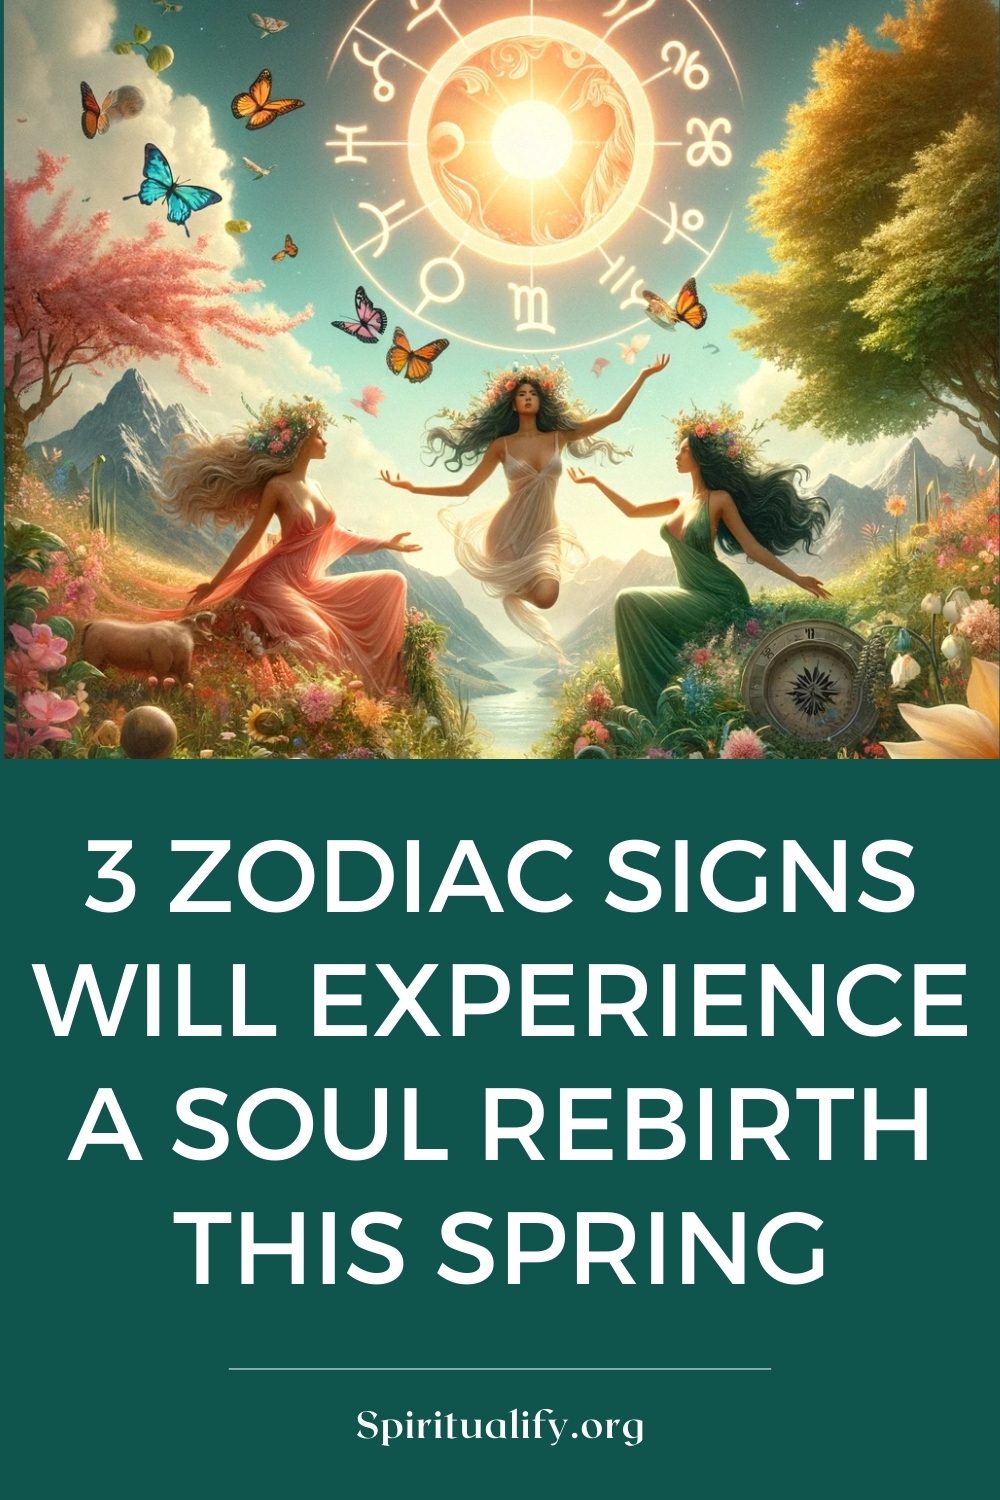 3 Zodiac Signs That Will Experience a Soul Rebirth This Spring